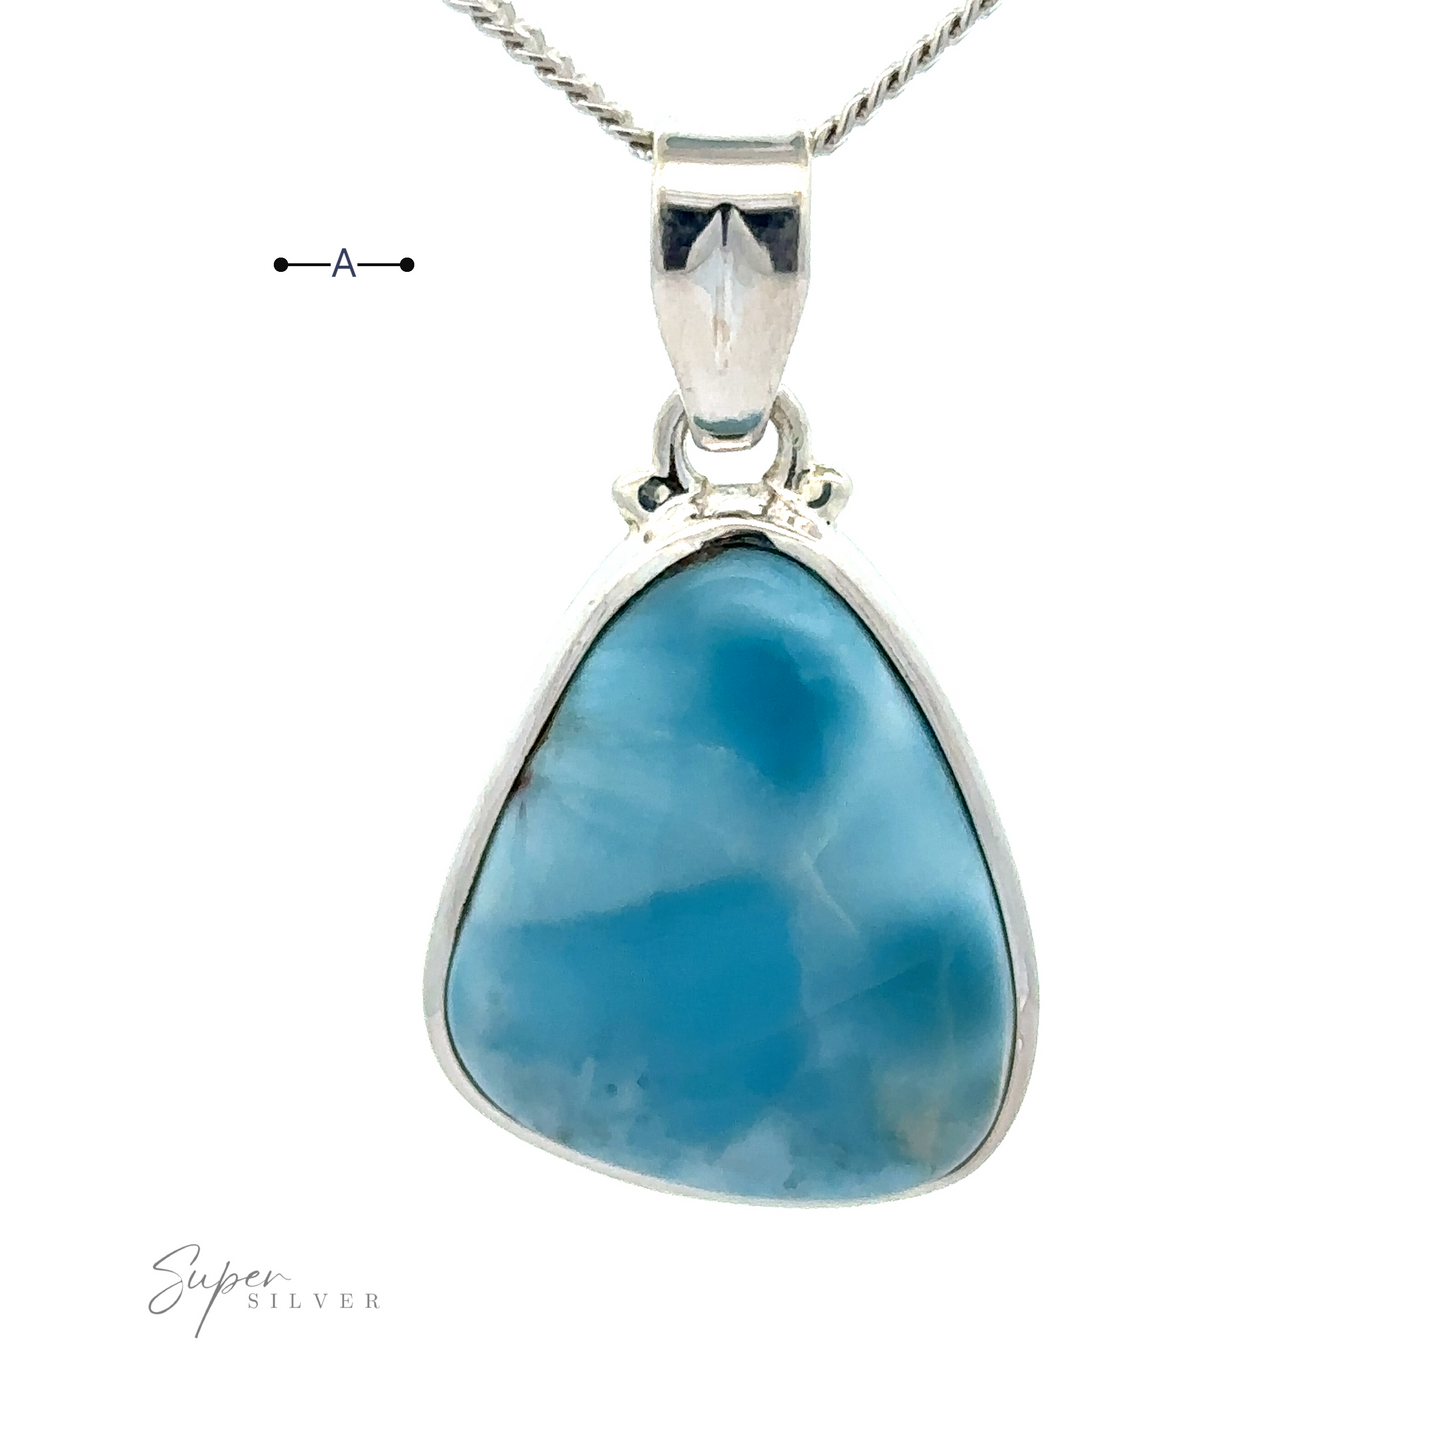 
                  
                    A silver necklace with a Freeform Shape Larimar Pendant is shown against a white background. The pendant has slight marbling and is polished. The sterling silver chain features a simple twisted design, but please note the chain is not included.
                  
                